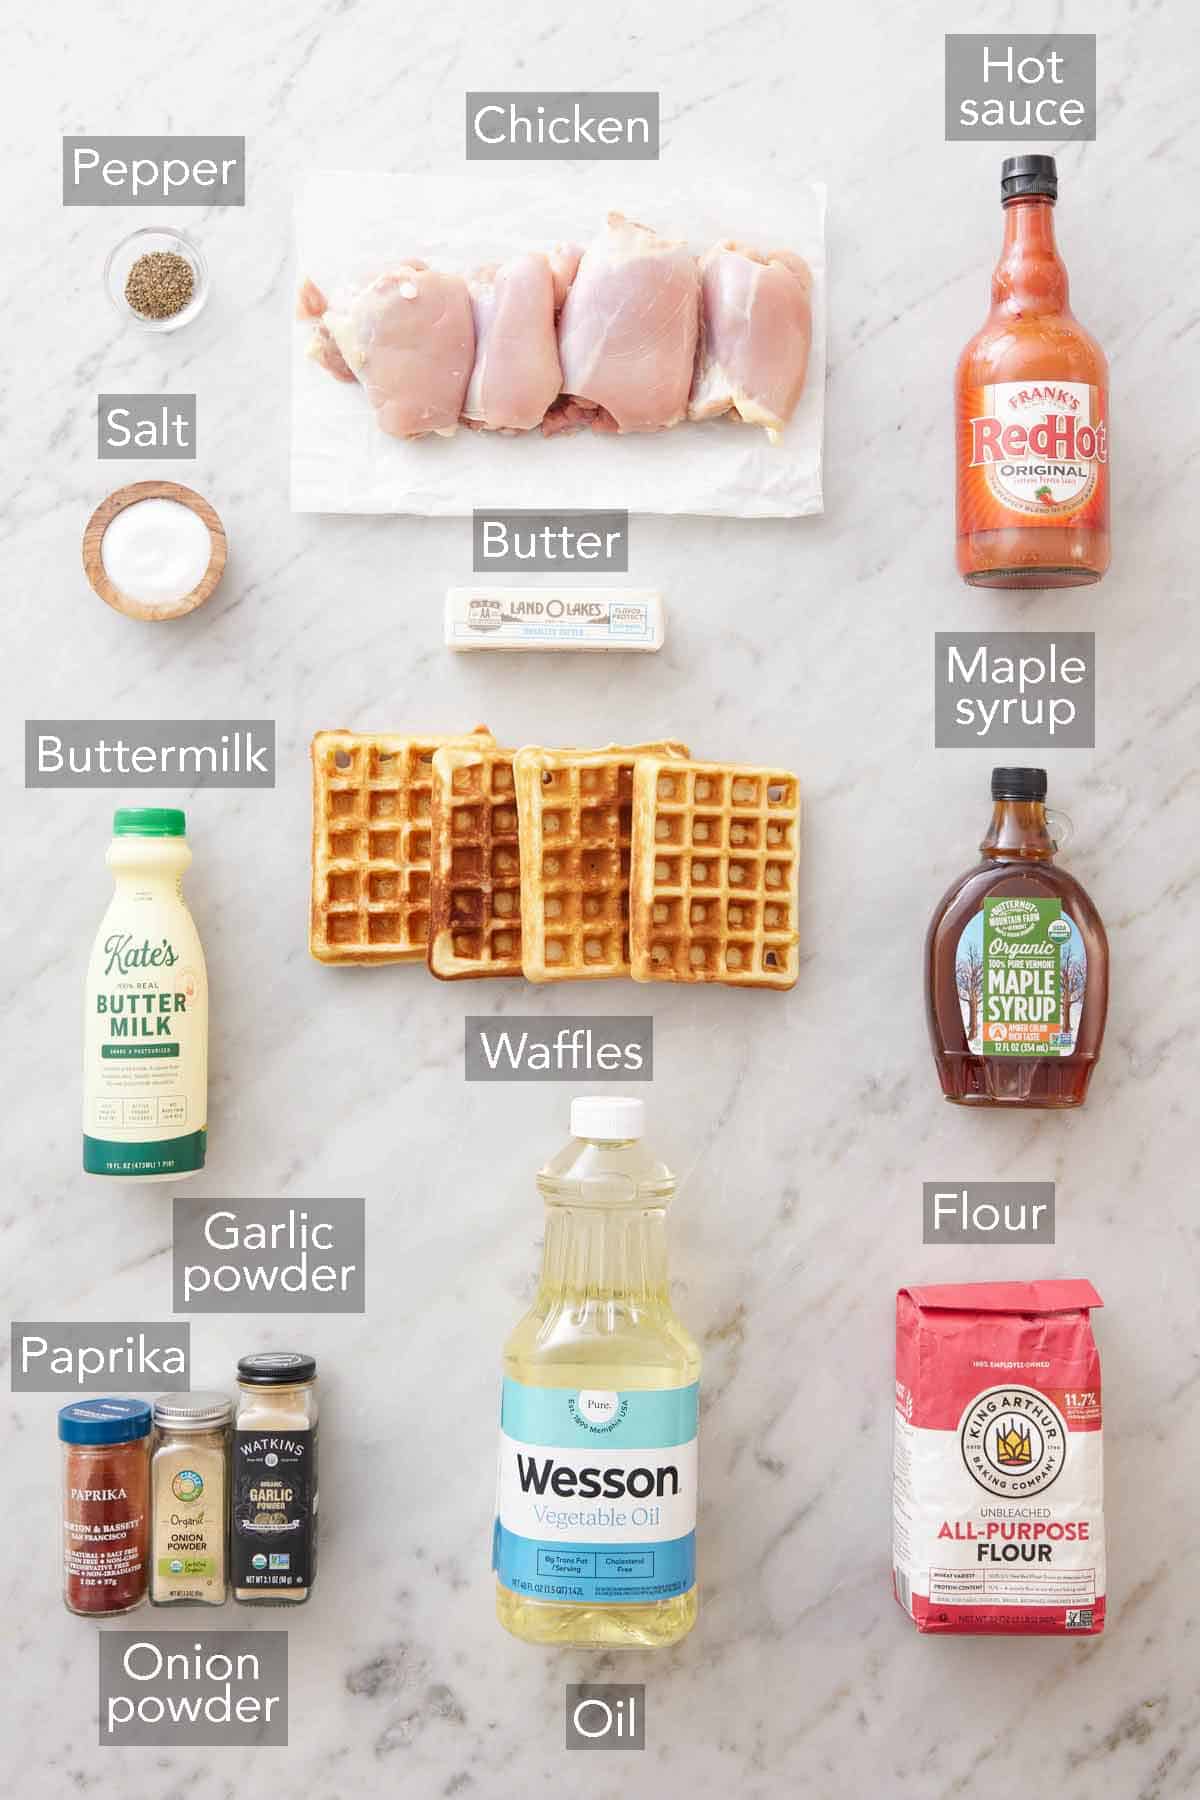 Ingredients needed to make chicken and waffles.